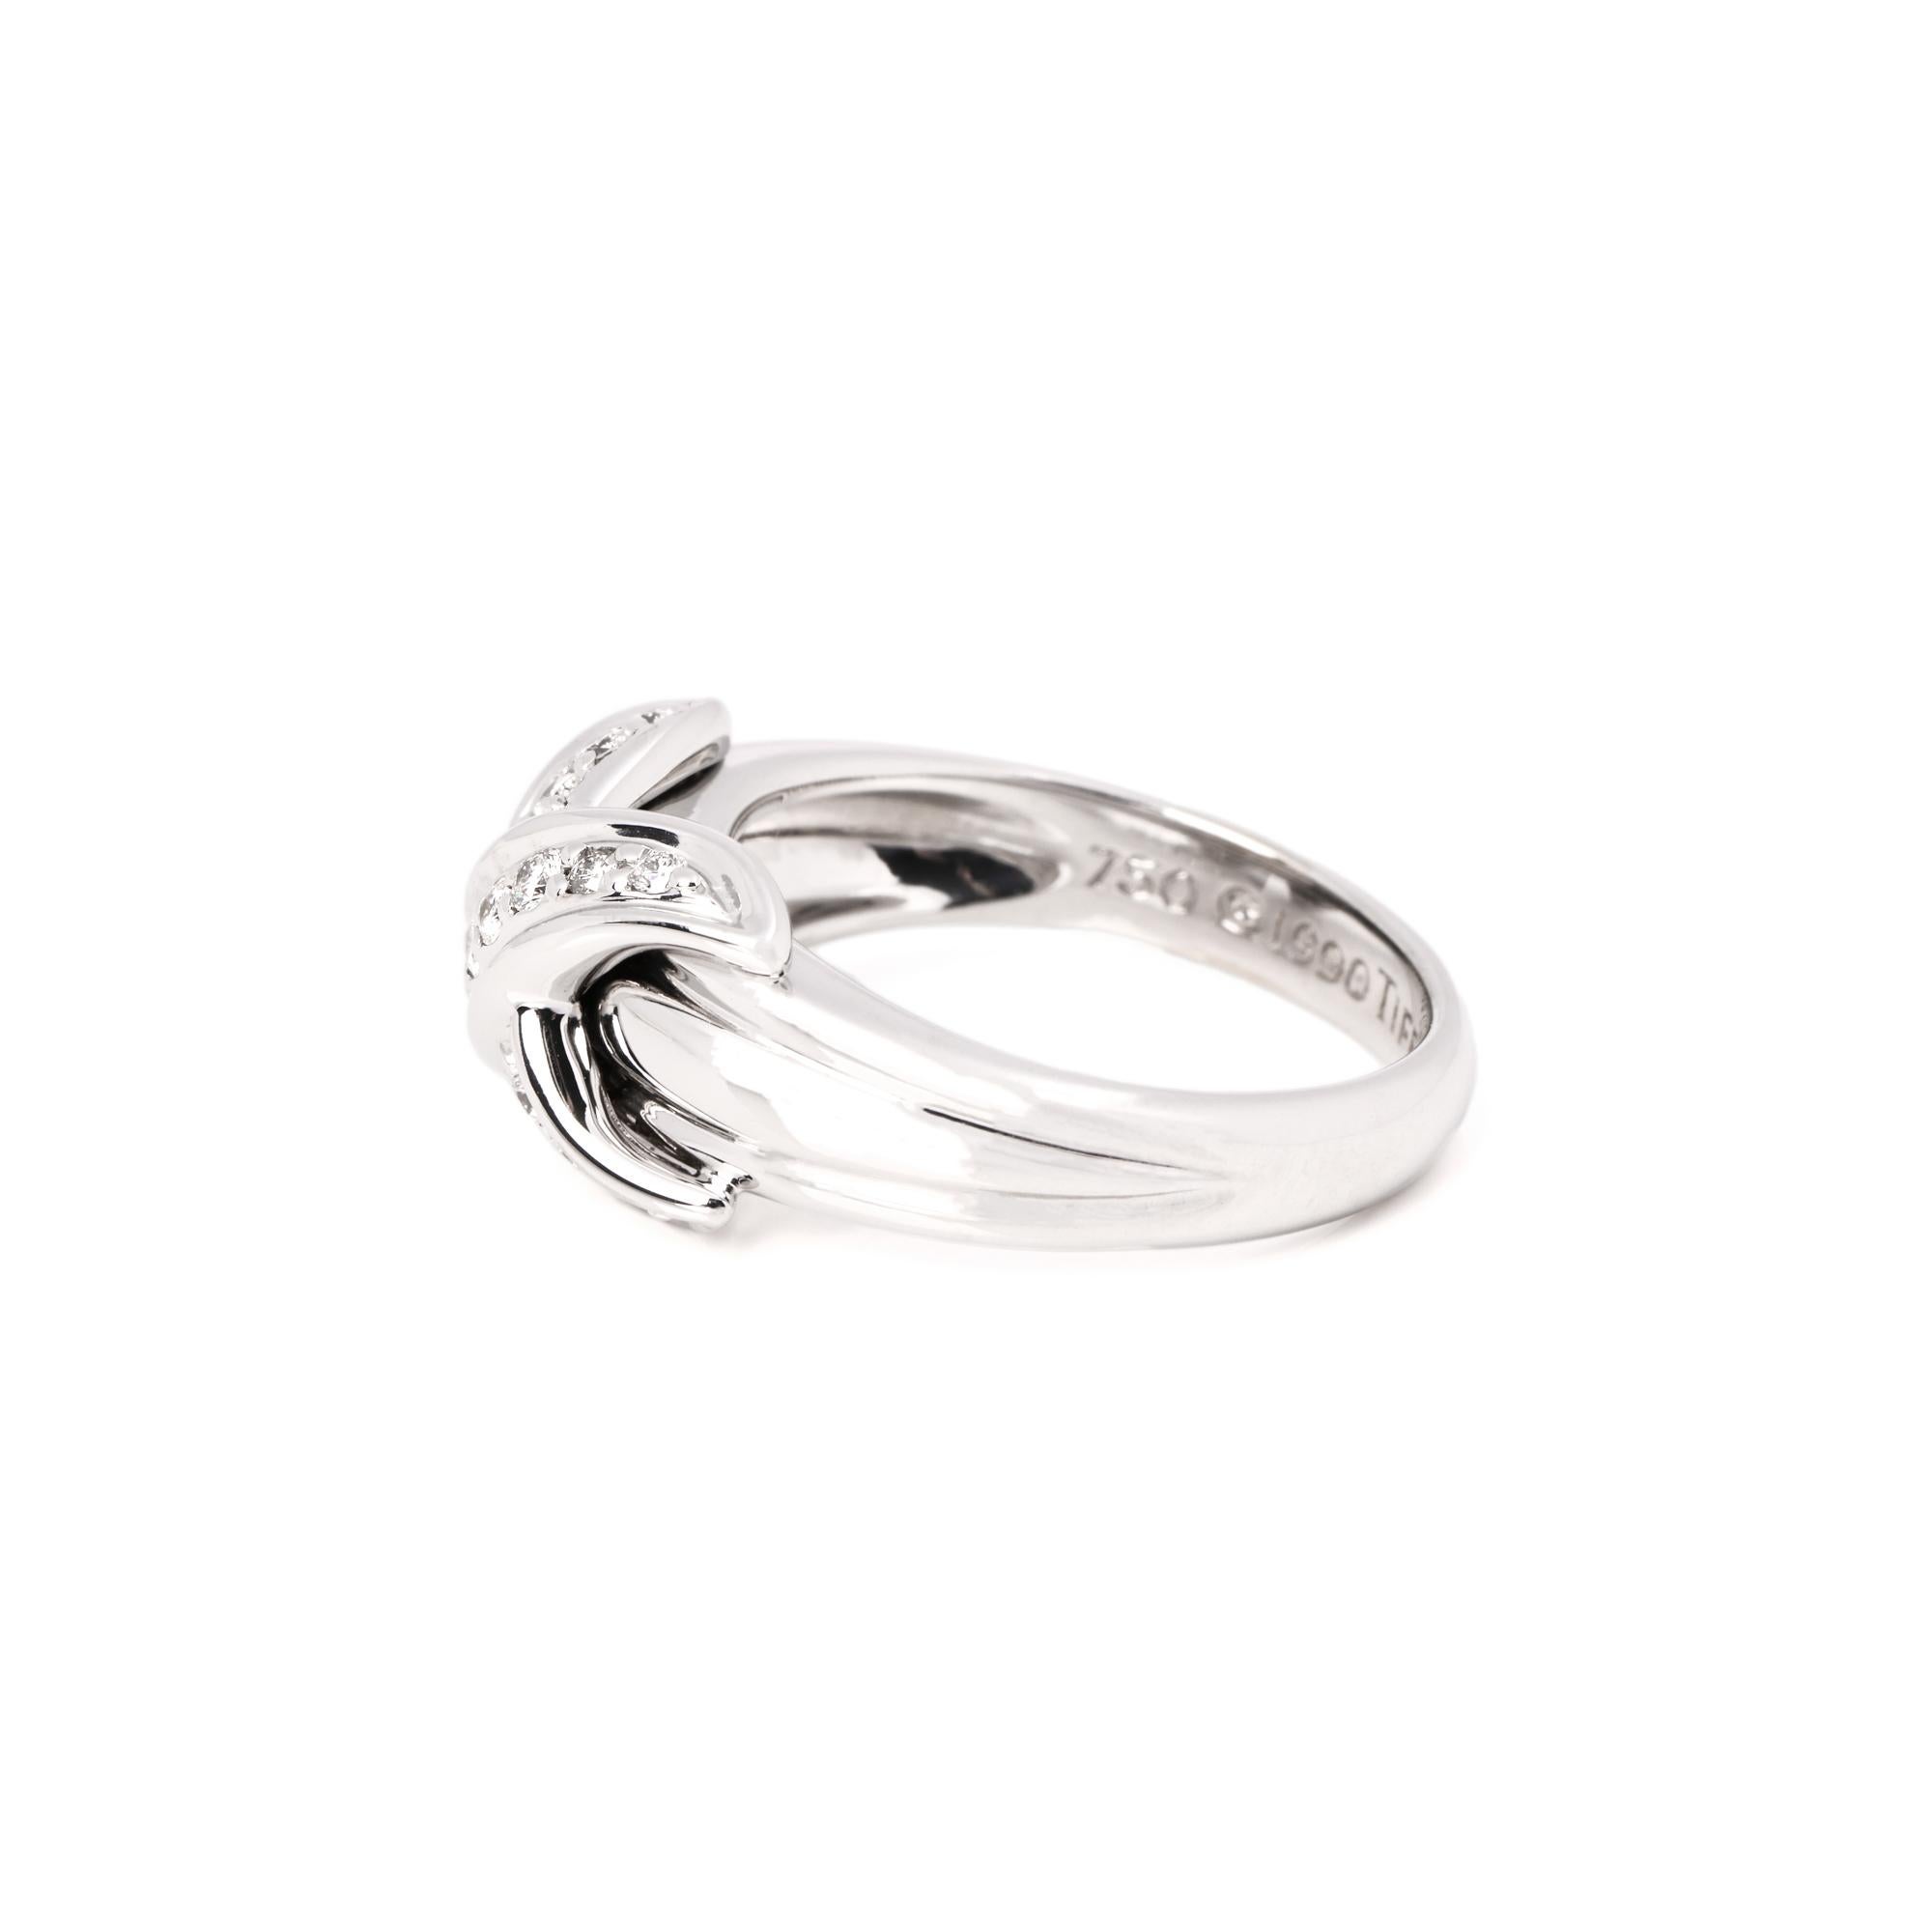 This ring by Tiffany & Co is from their Signature X Kiss Collection and features 15 round brilliant cut diamonds mounted on White Gold. Accompanied by a Tiffany & Co Box. Our Xupes reference is COMJ687 should you need to quote this.

ITEM